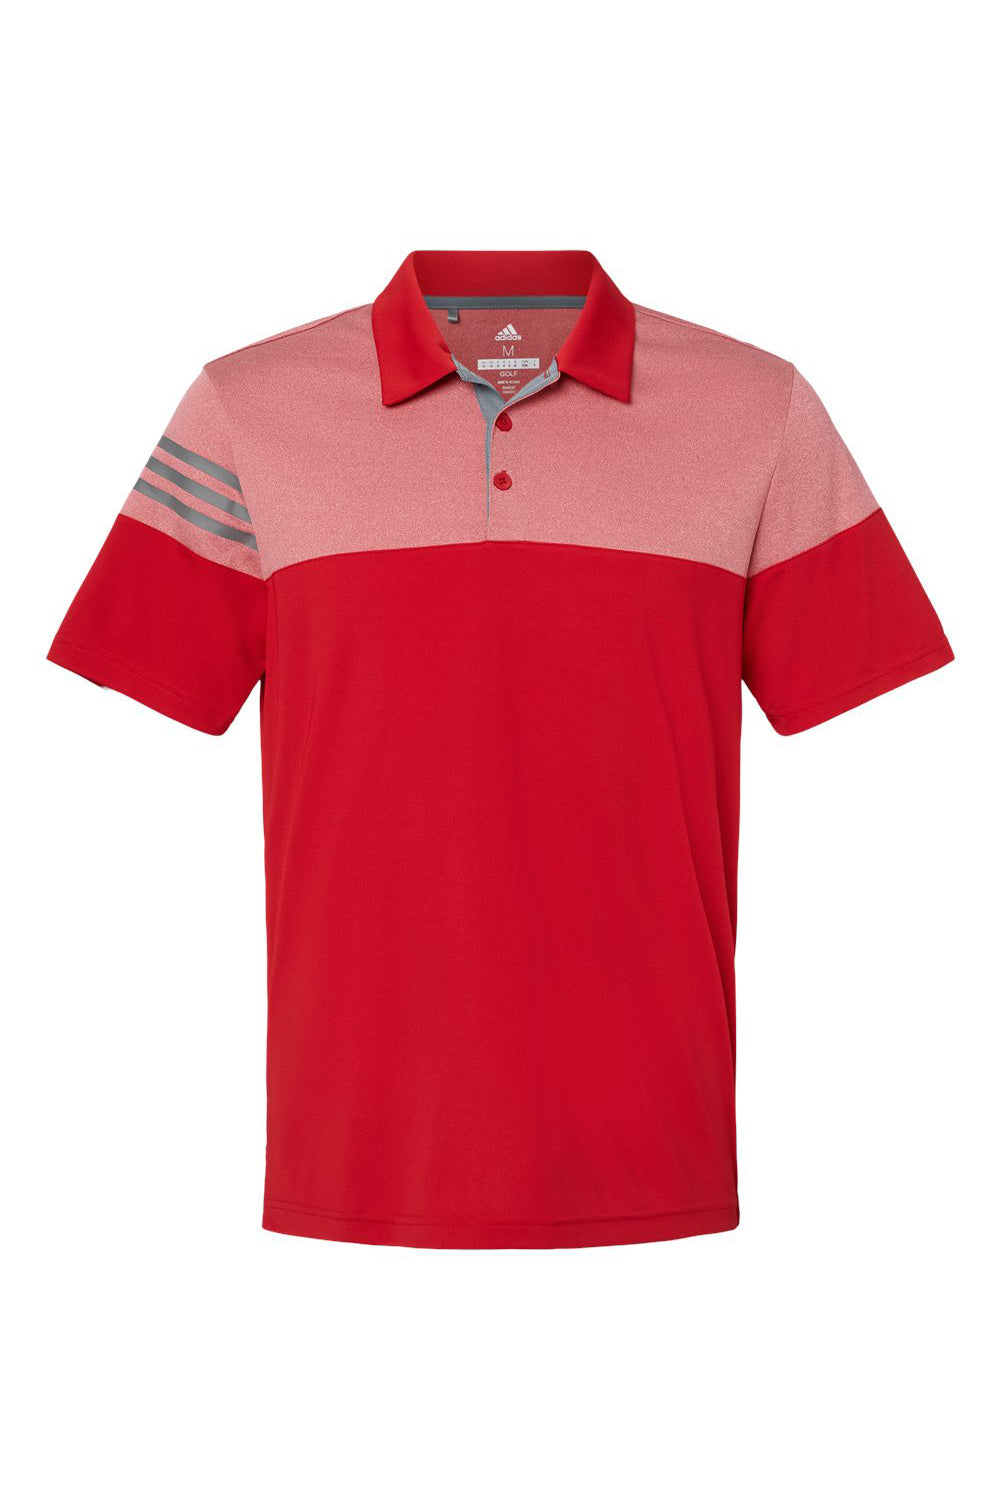 Adidas A213 Mens 3 Stripes Colorblock Moisture Wicking Short Sleeve Polo Shirt Power Red Flat Front